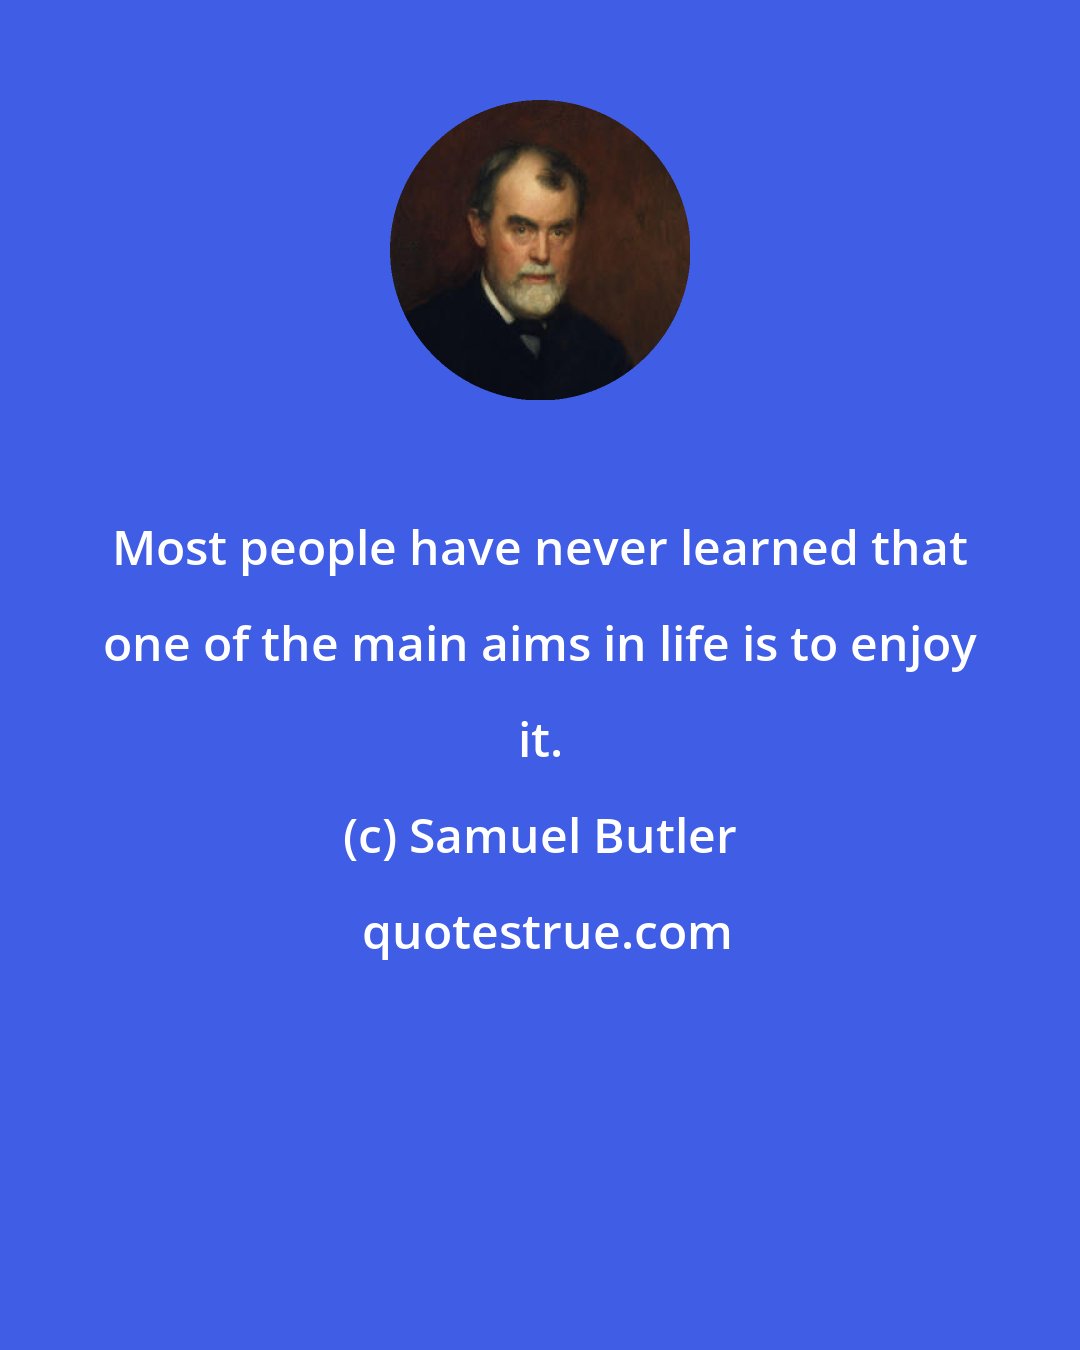 Samuel Butler: Most people have never learned that one of the main aims in life is to enjoy it.